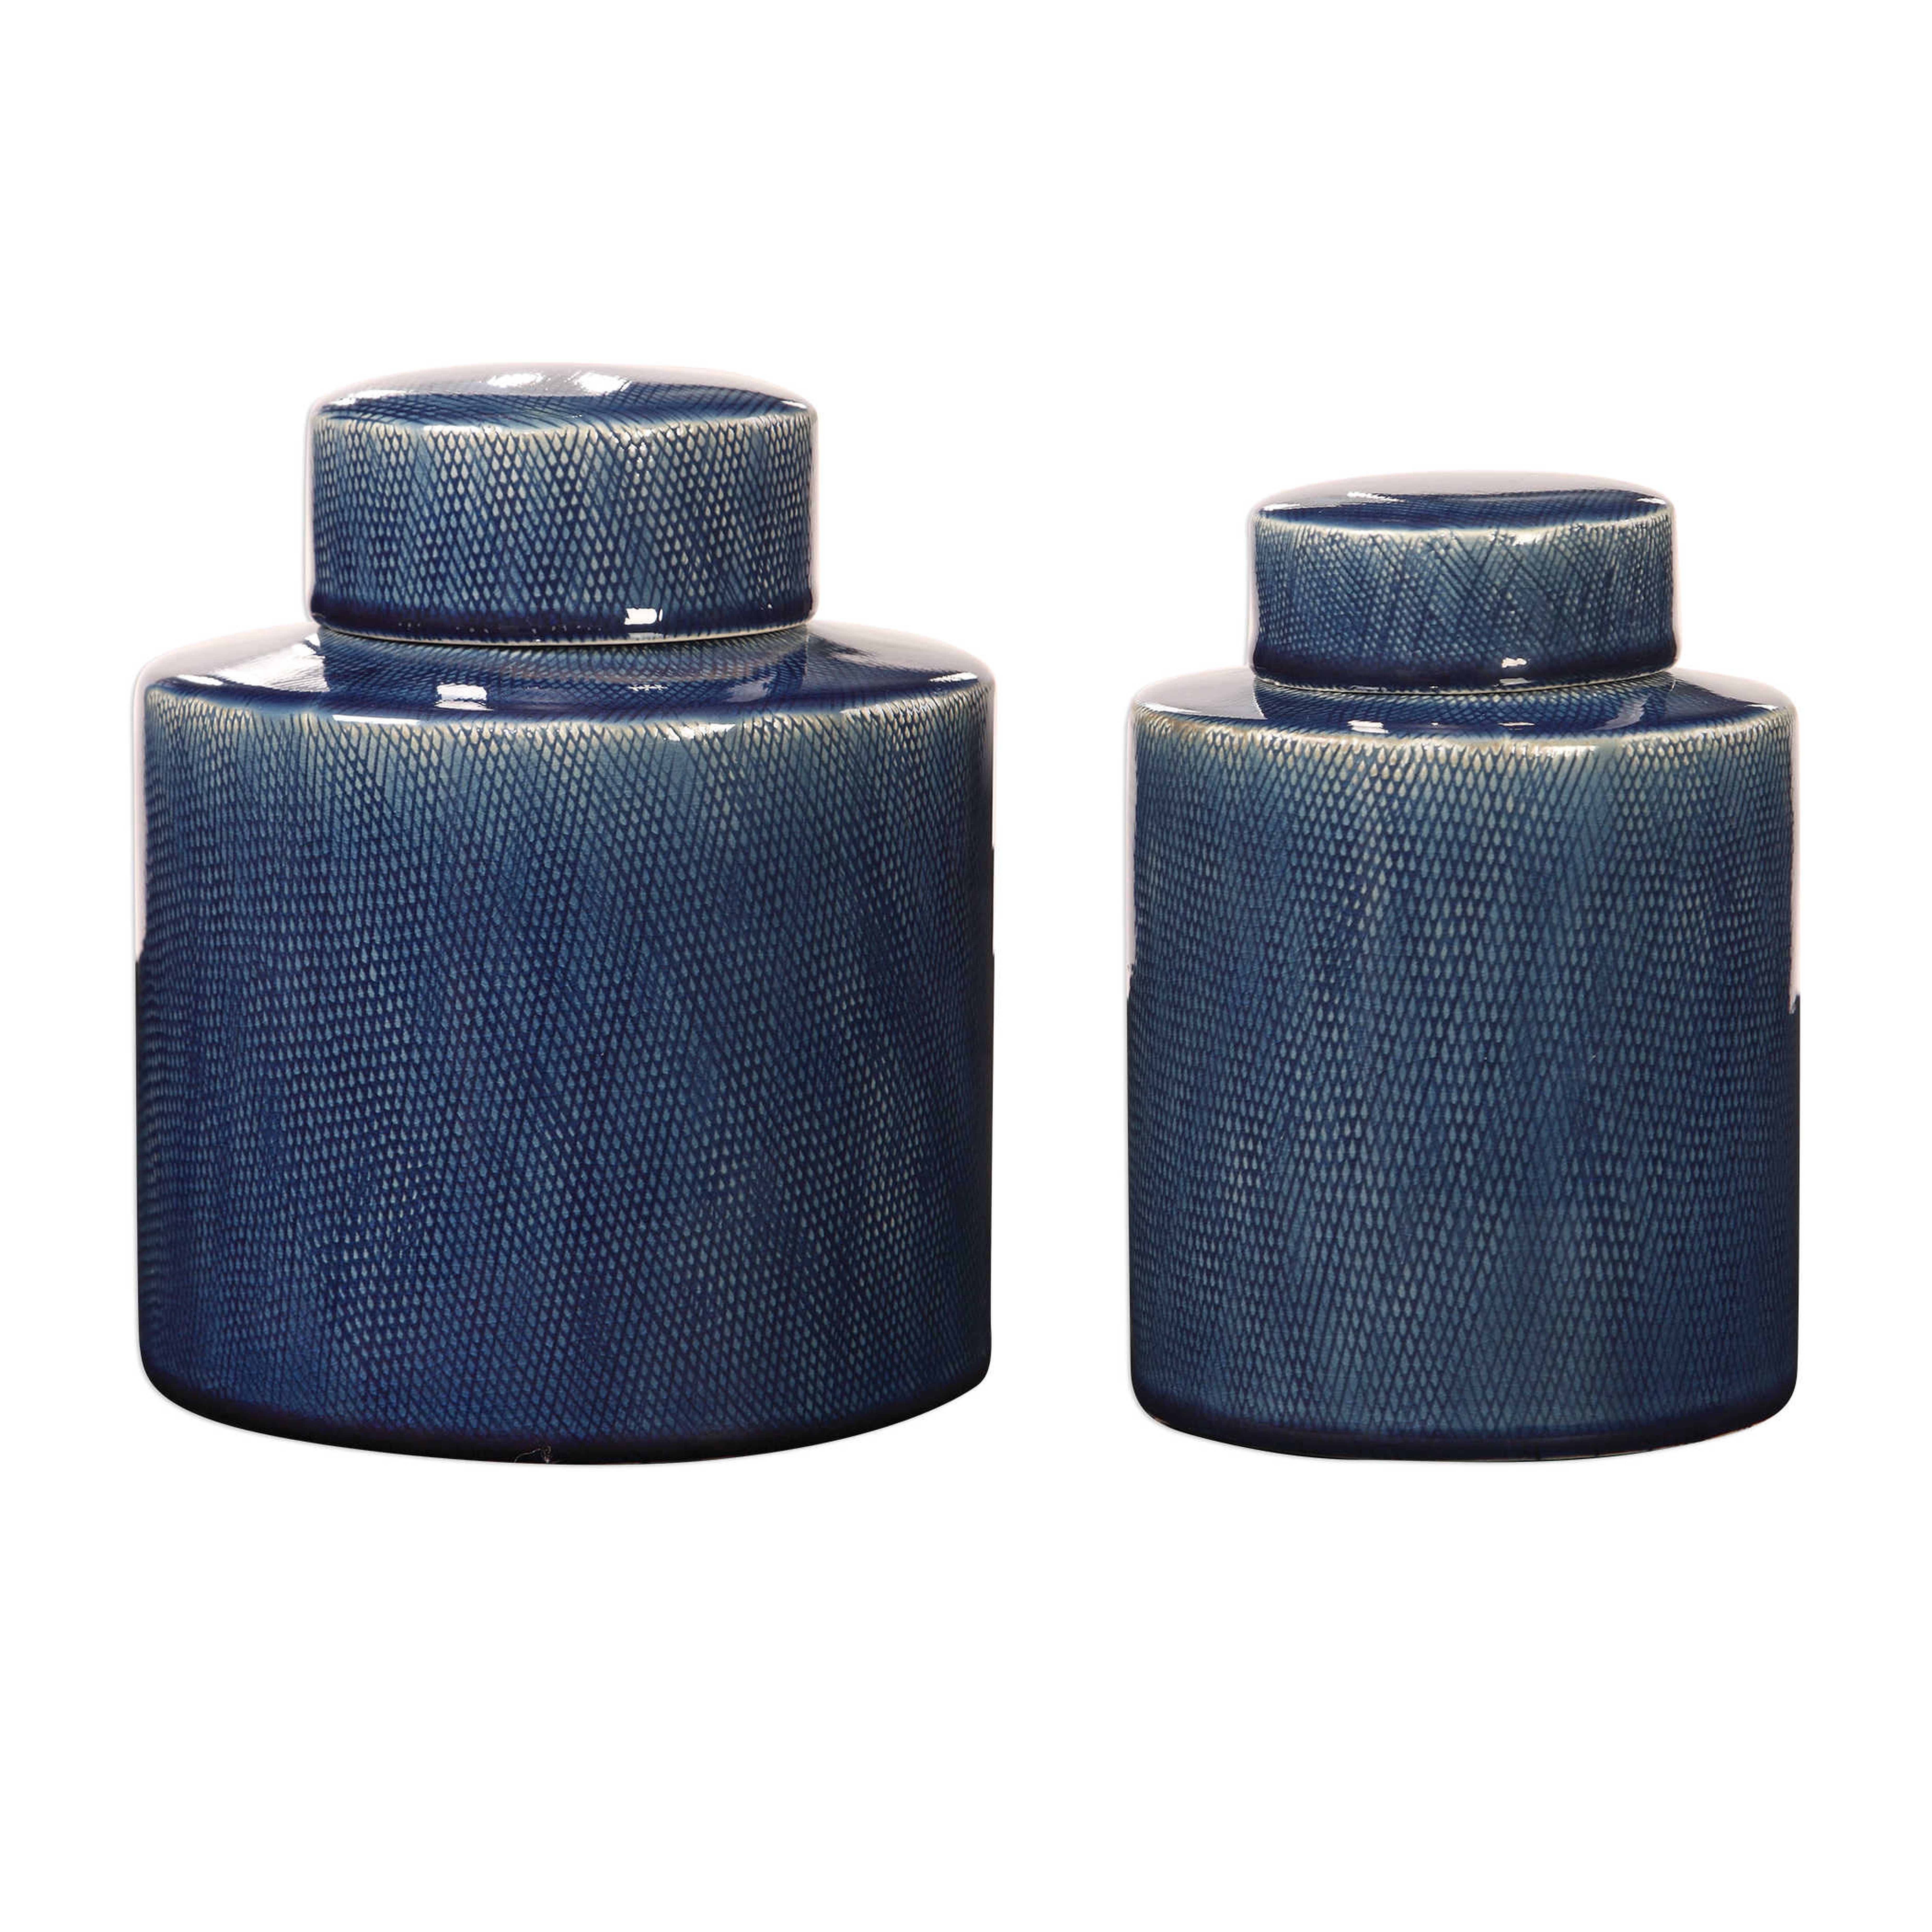 SANIYA CONTAINERS, S/2 - Hudsonhill Foundry